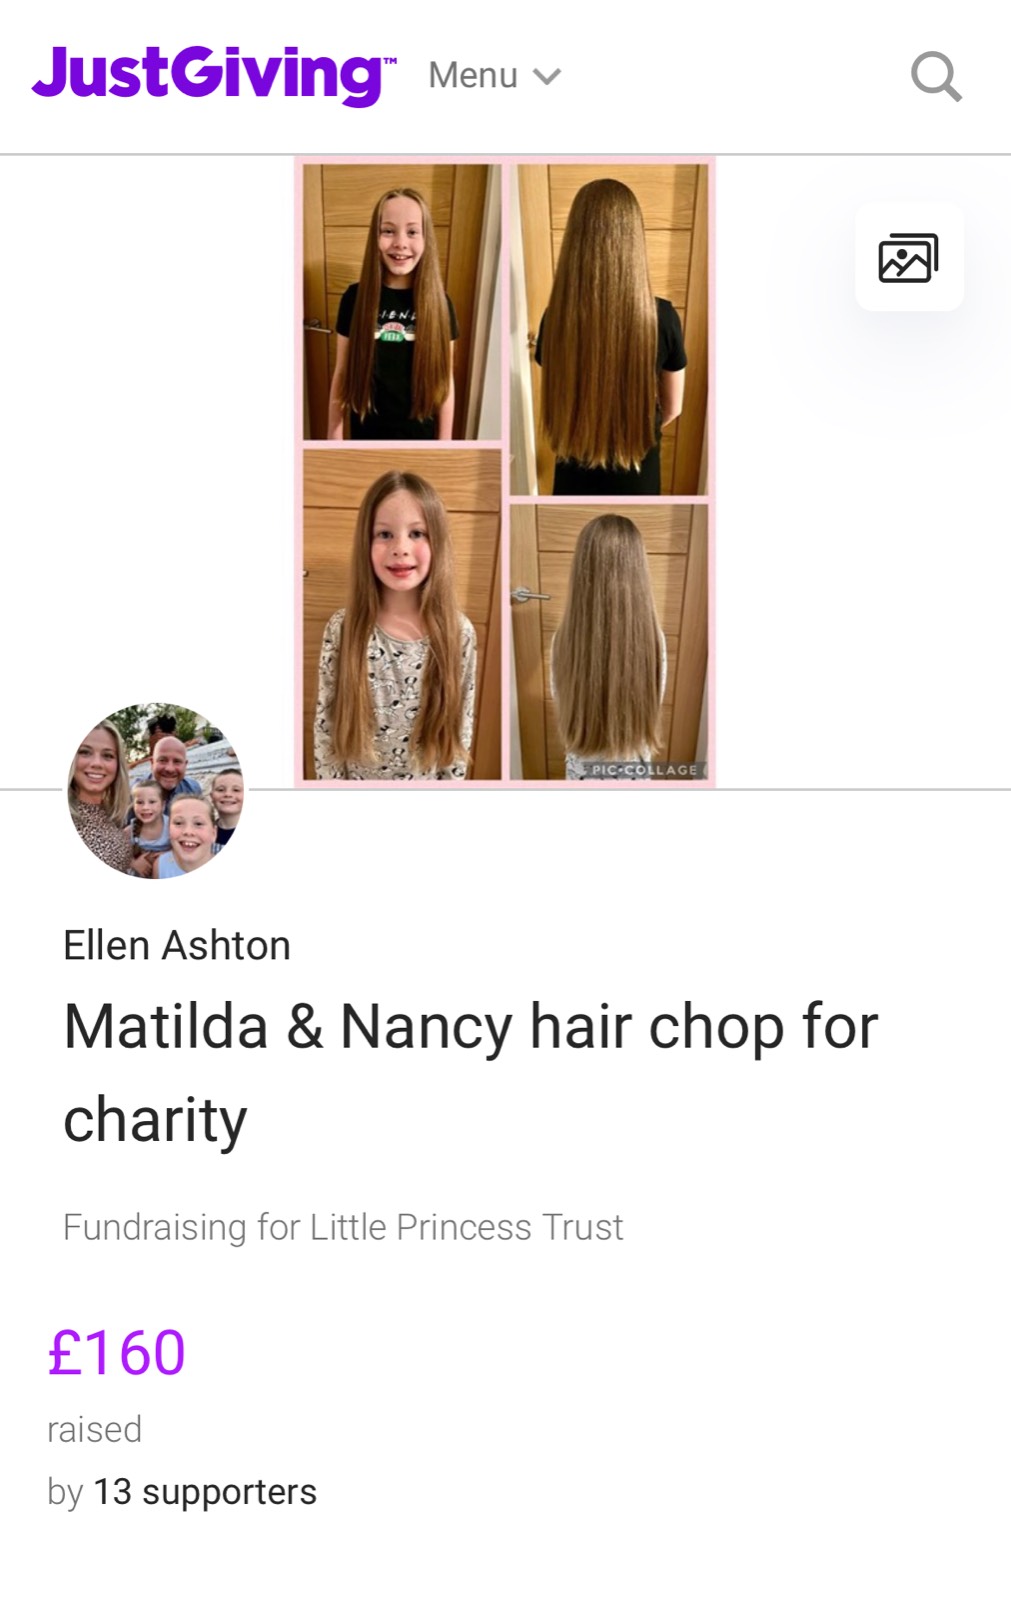 Matilda and Nancy’s hair chop and fundraising for the Little Princess Trust